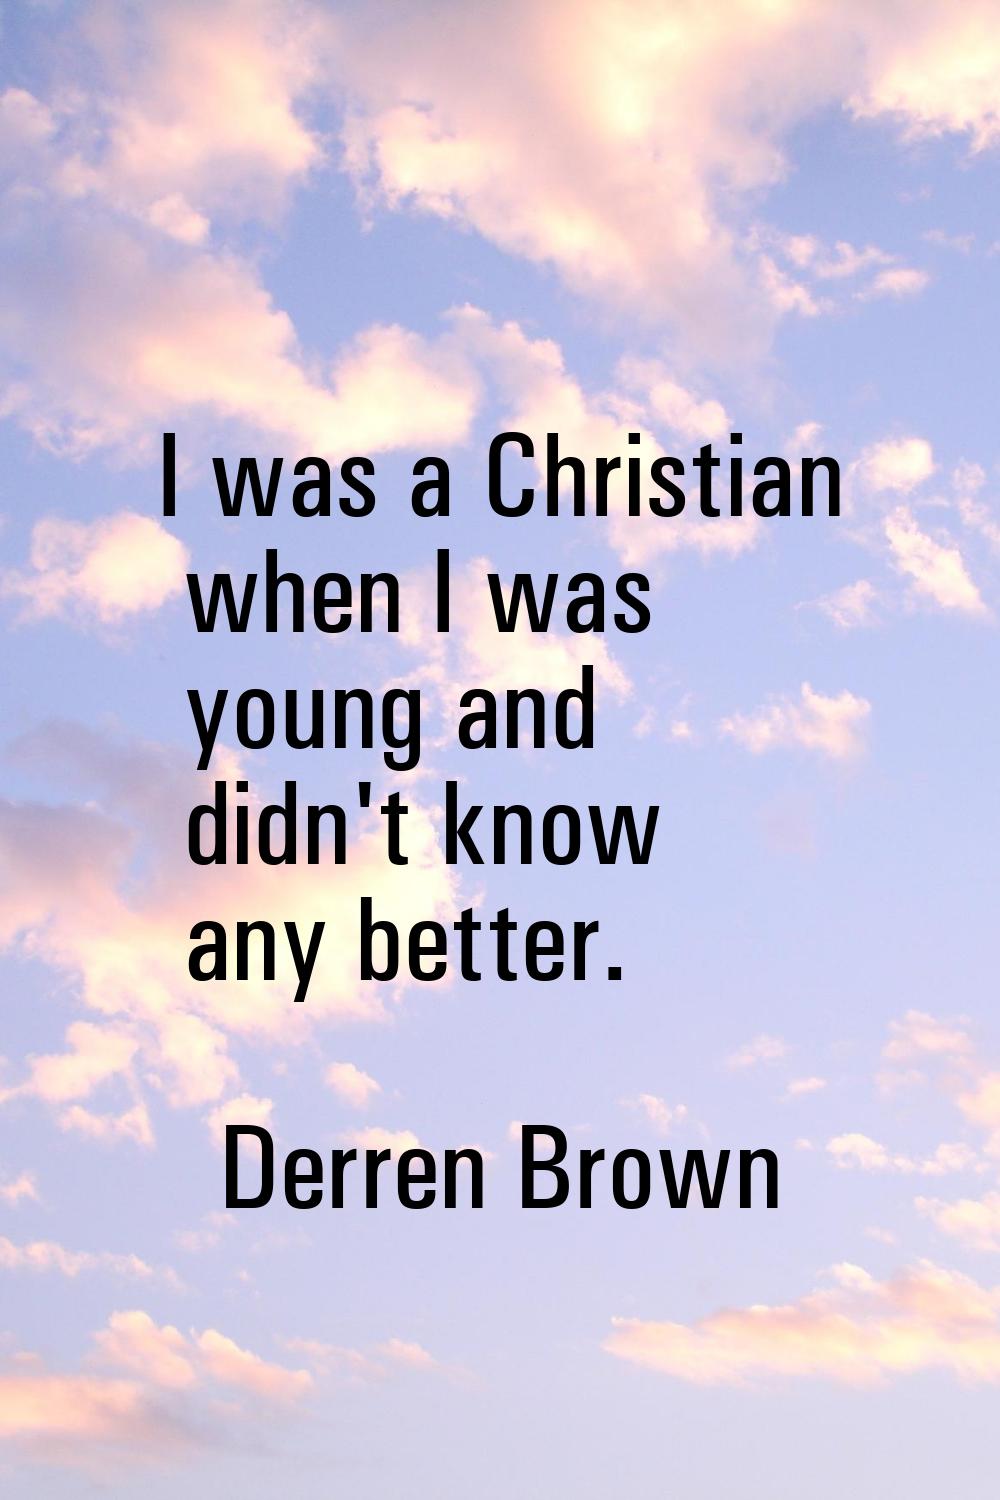 I was a Christian when I was young and didn't know any better.